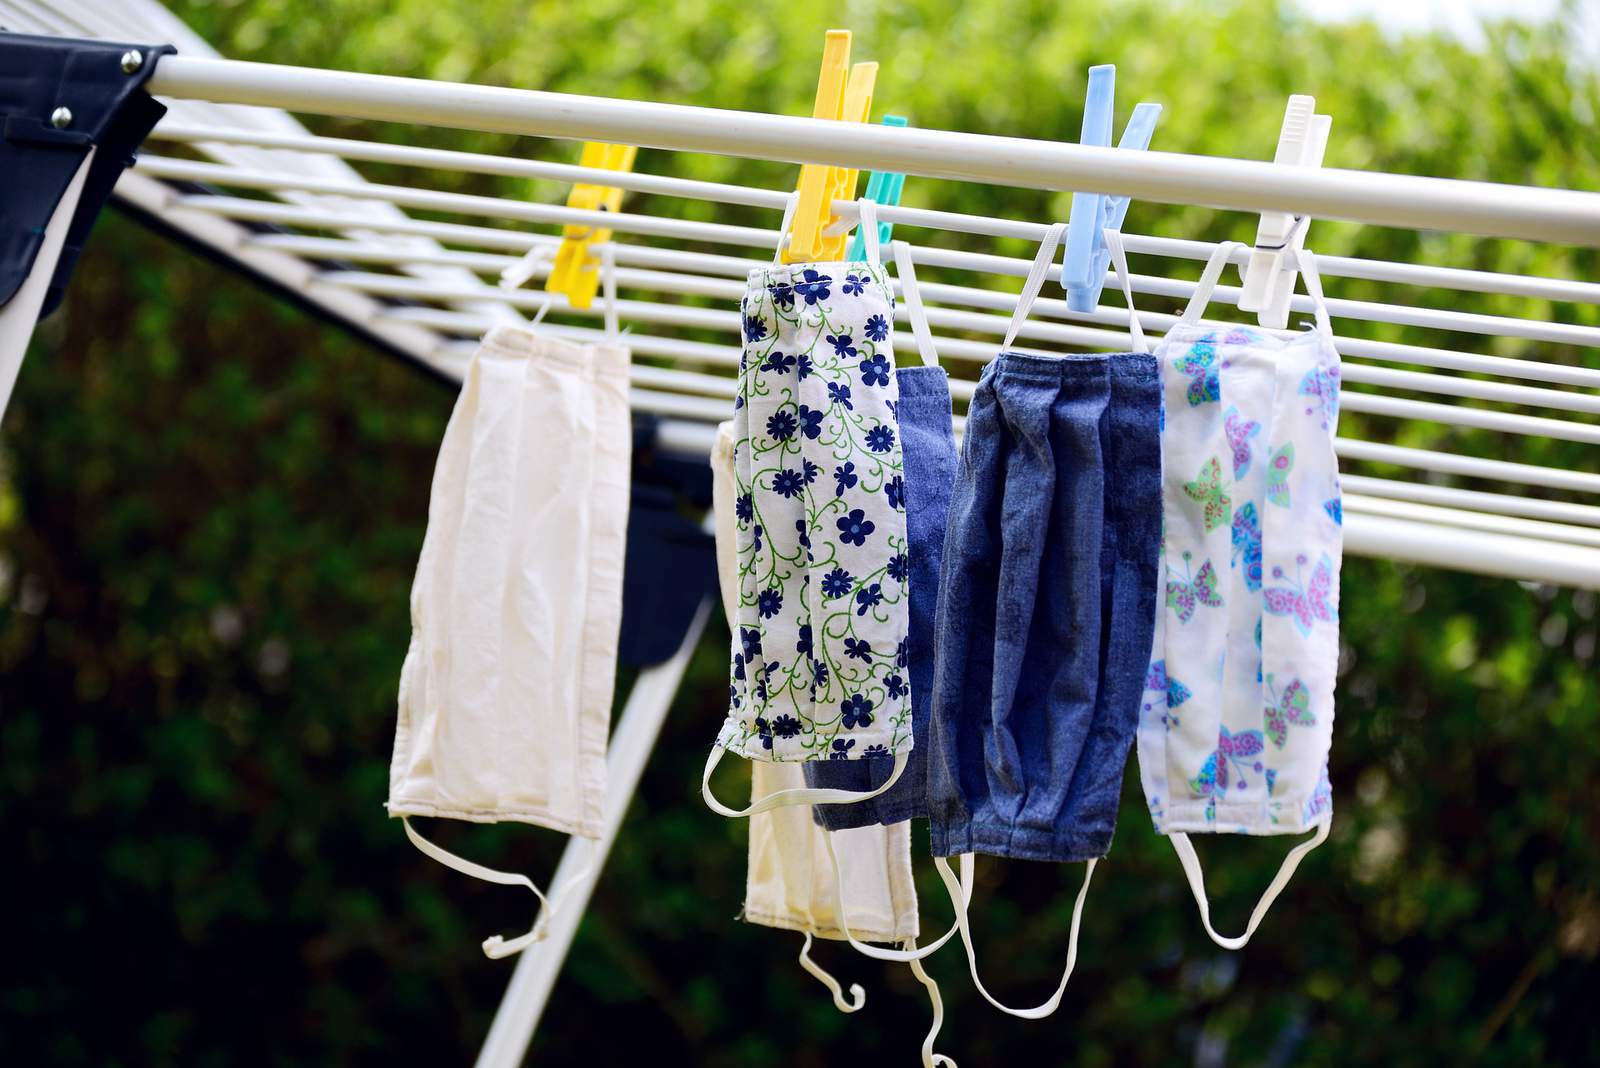 How to wash your cloth masks correctly, according to the CDC